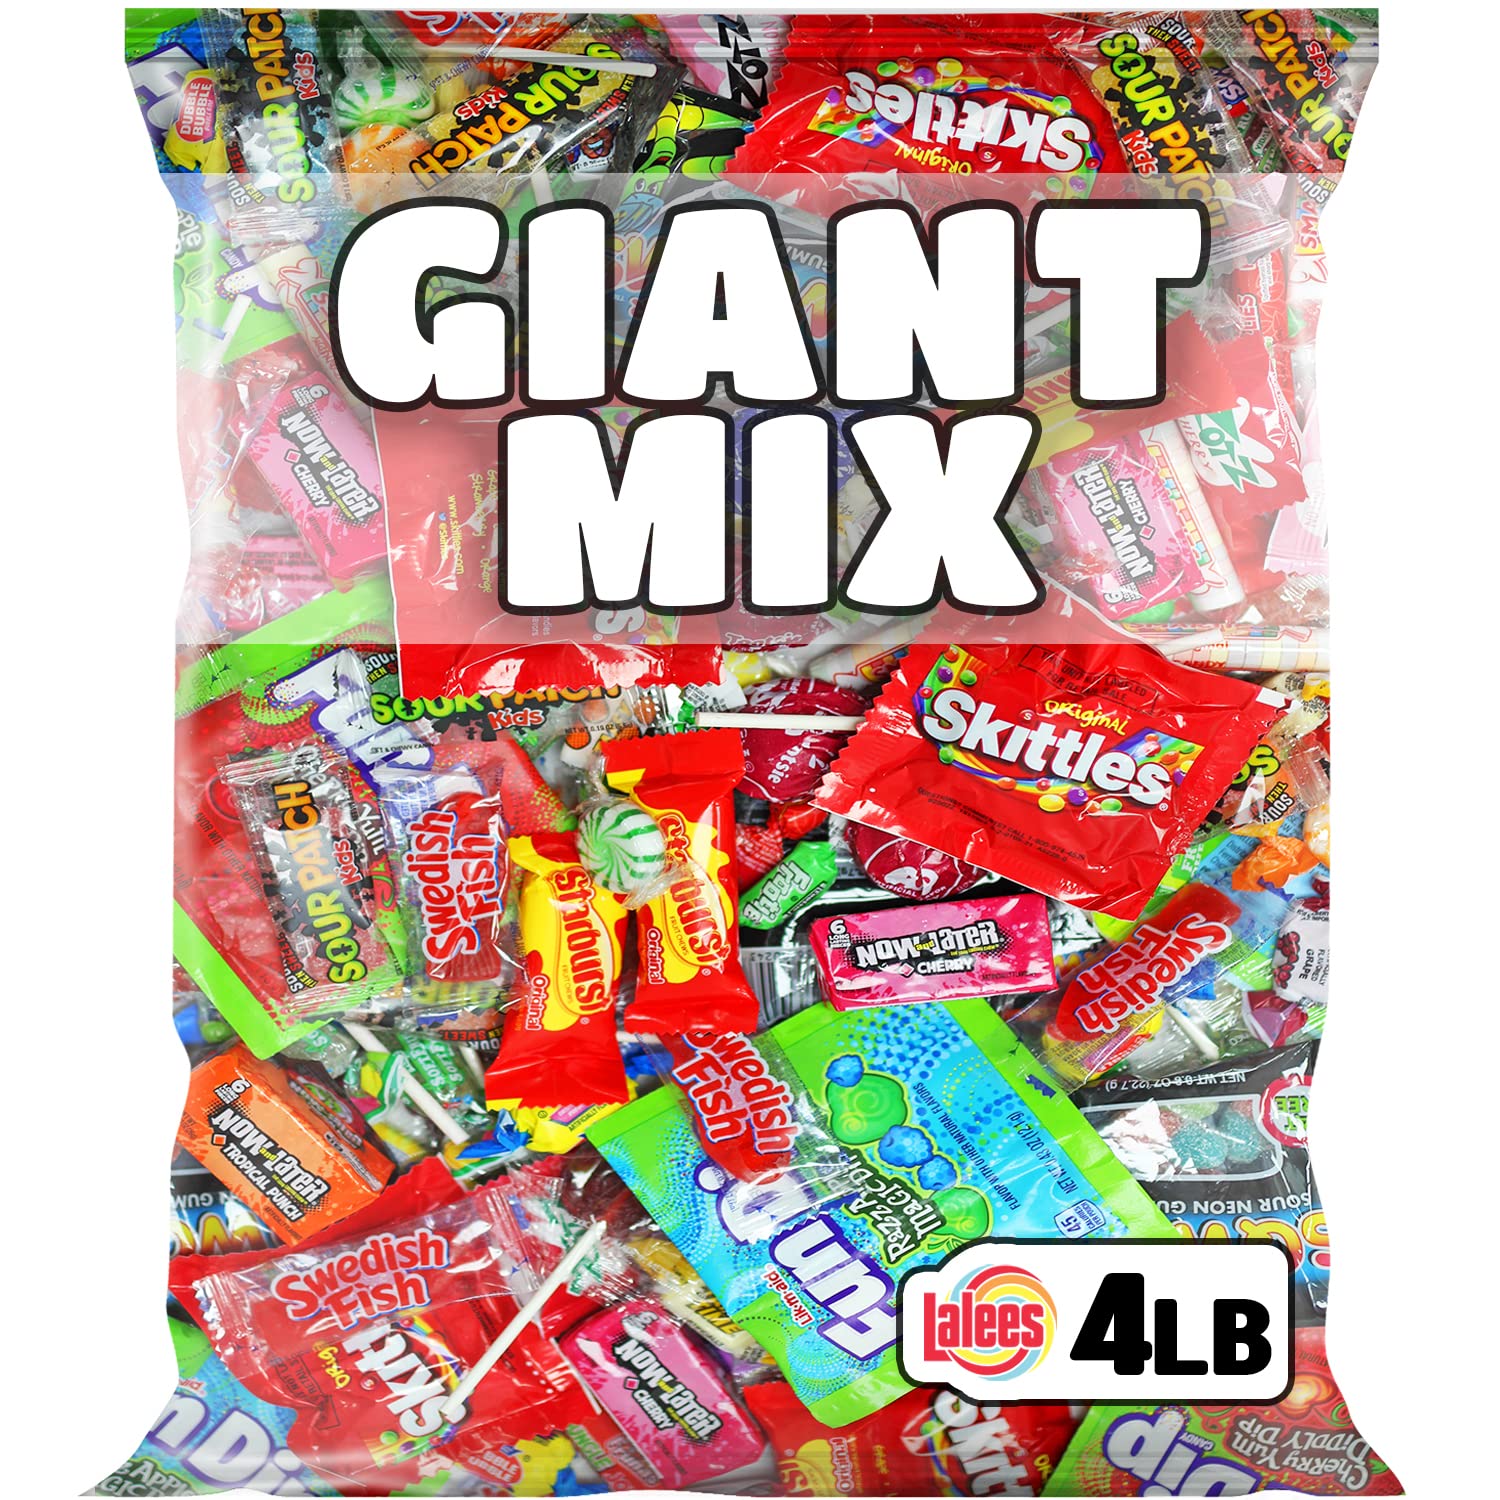 Bulk Candy Assortment, Individually Wrapped, Halloween, Parade, Pinata  Candy, Birthday Favors, 1,000 Pieces, 9 lbs